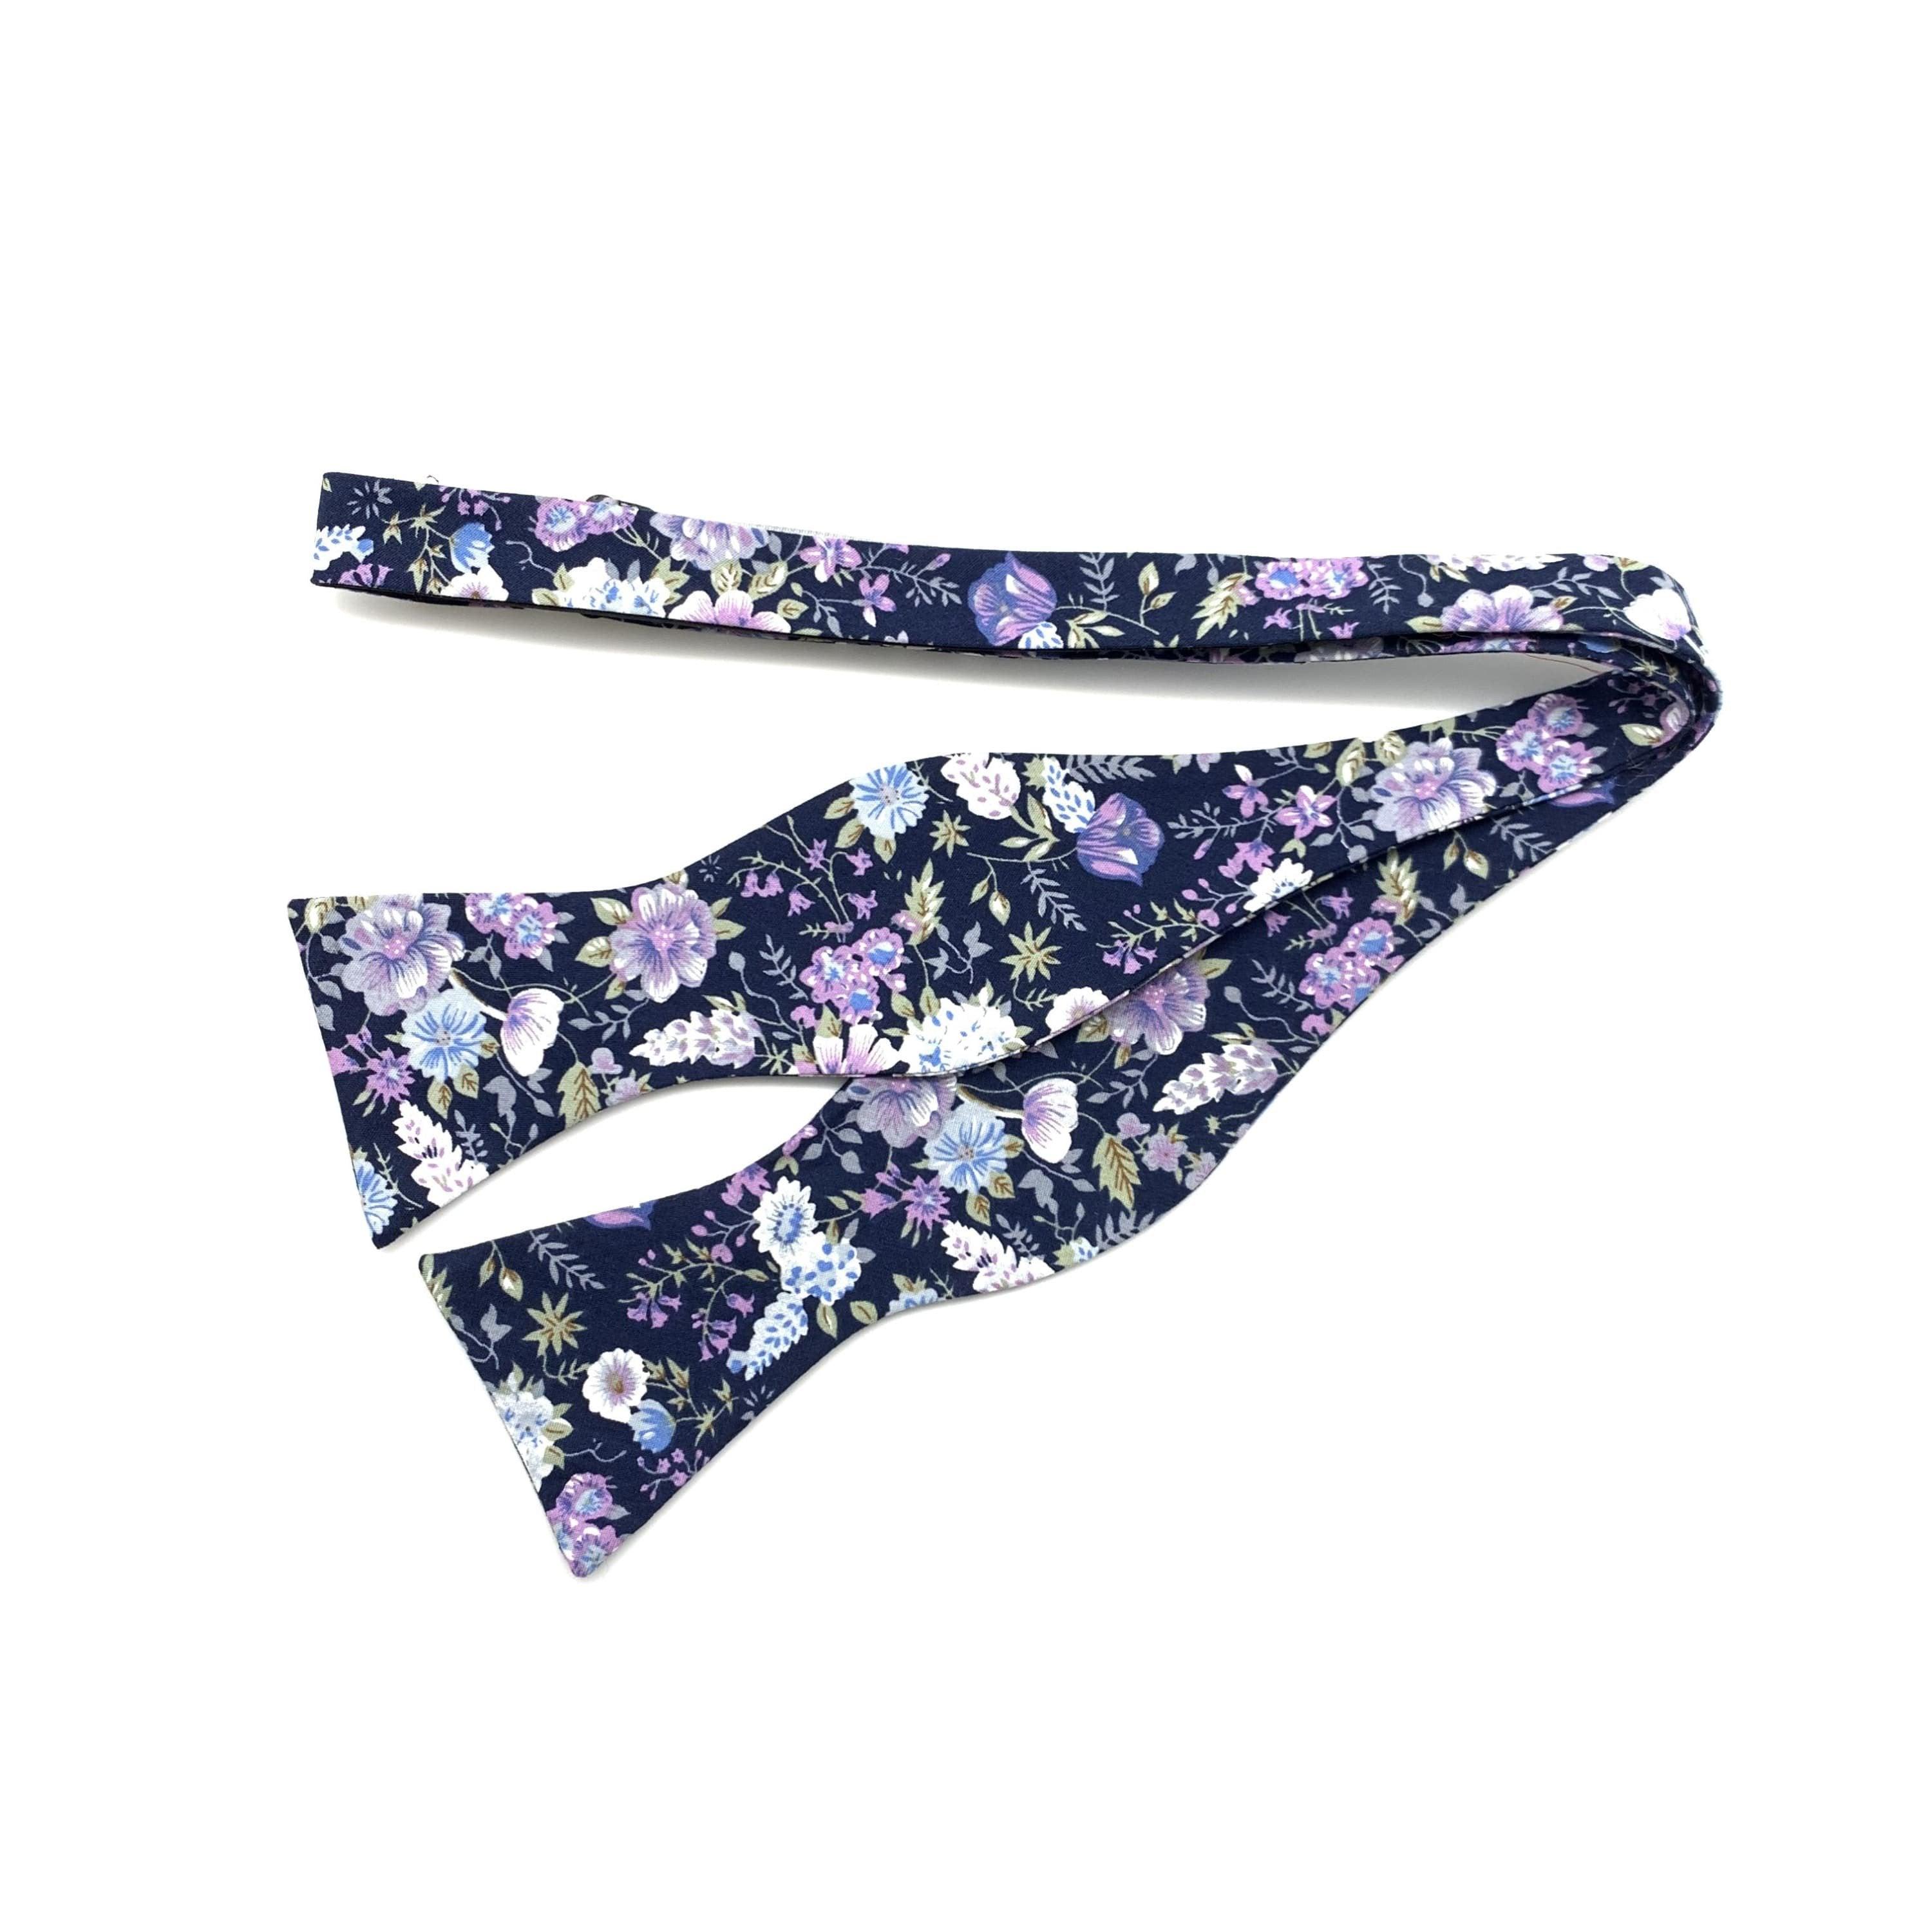 Purple Floral Bow Tie Self Tie Bow Tie Mytieshop - SWEET PEA-Purple floral bow tie Sweet Pea Bow Tie 100% Cotton Flannel Handmade Adjustable to fit most neck sizes 13 3/4&quot; - 18&quot; Color: Blue Great for Prom Dinners Interviews Photo shoots Photo sessions Dates Groom to stand out between his Groomsmen pair them up with neckties while he wears the bow tie. Purple Floral Bow Tie Floral self tie bow tie for weddings and events. Great anniversary present and gift. Also great gift for the groom and his g